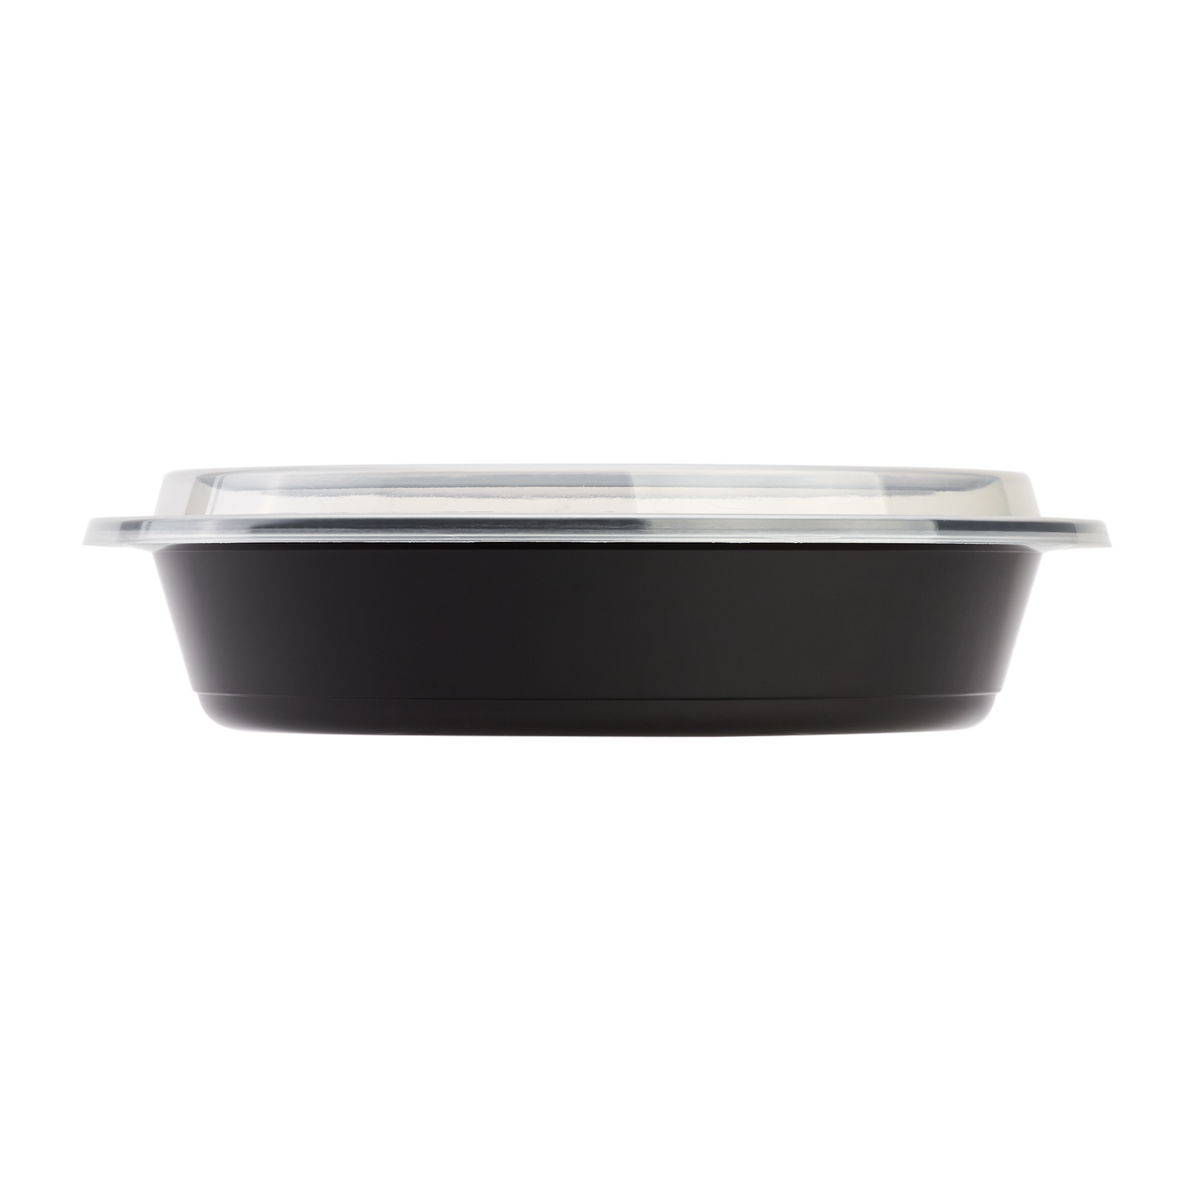 48oz Meal Prep Containers  48 oz Extra Large Round Food Containers